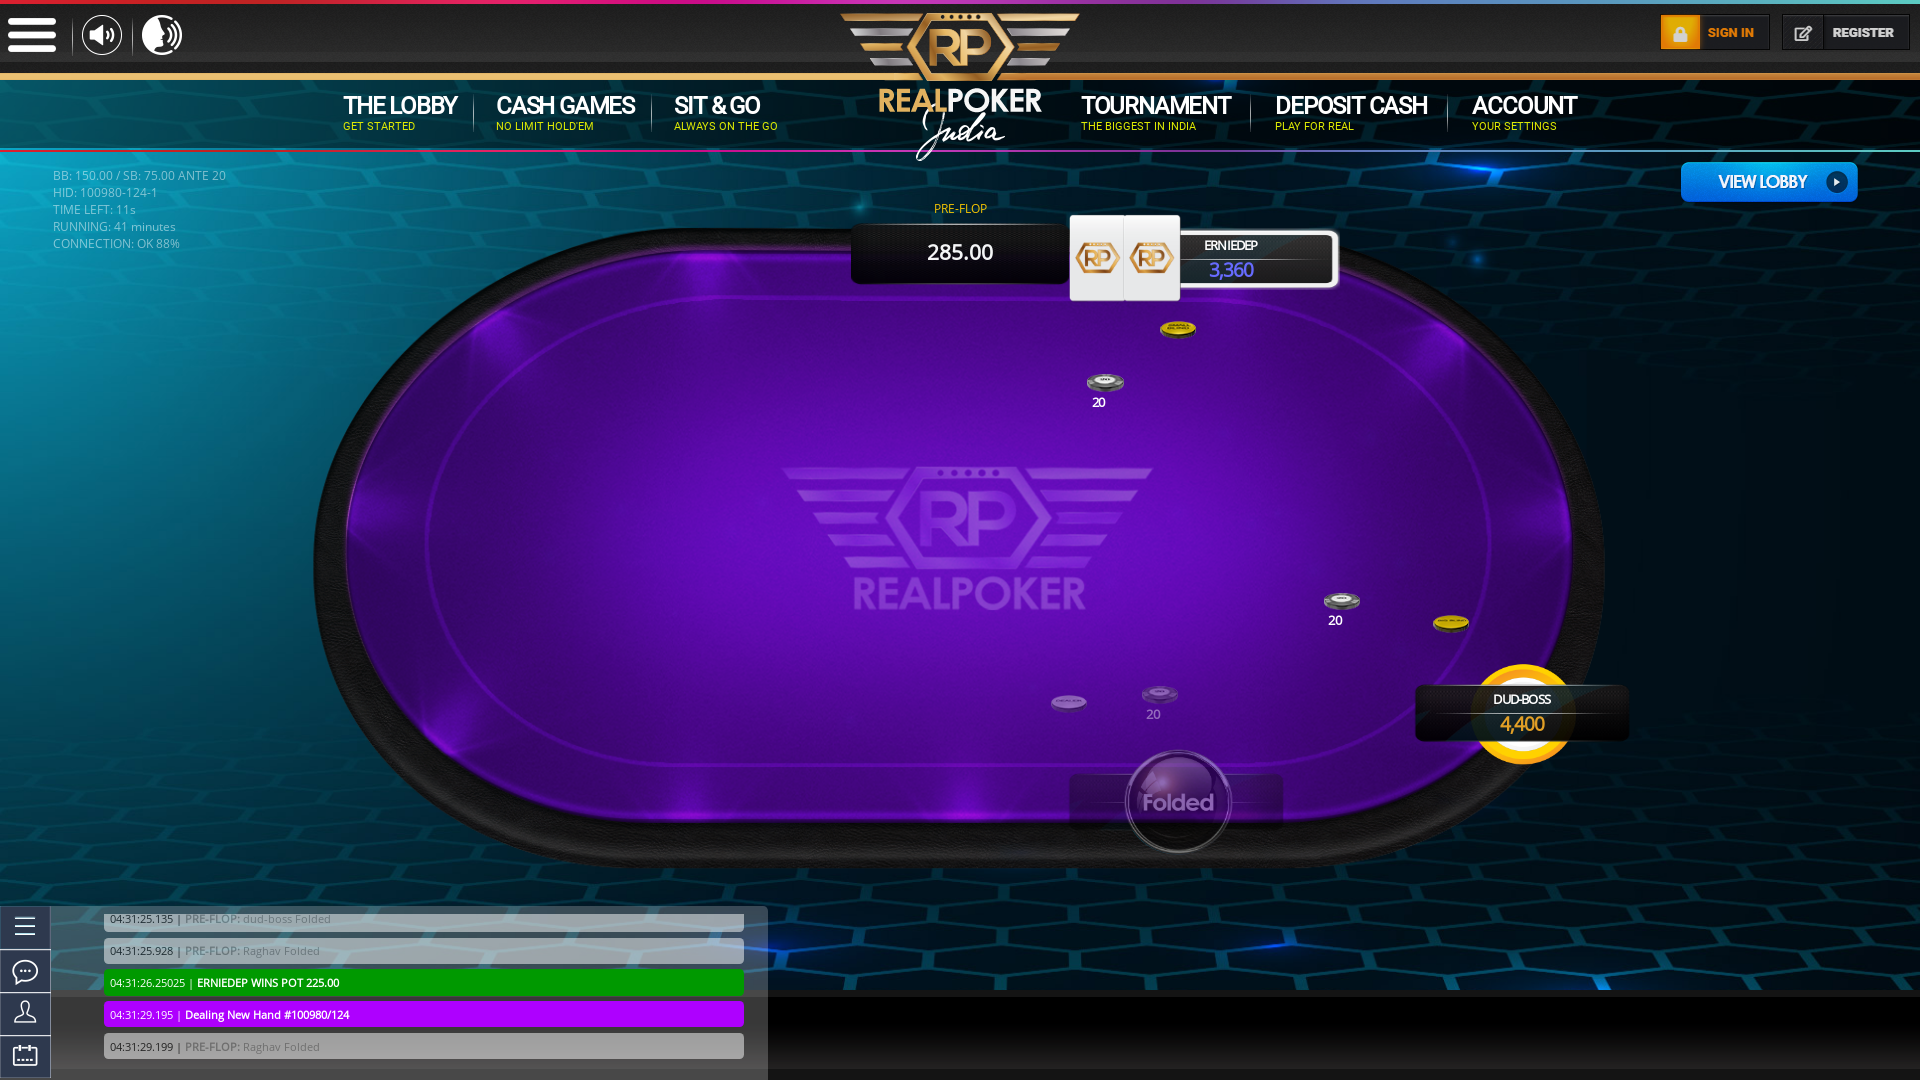 Real poker 10 player table in the 41st minute